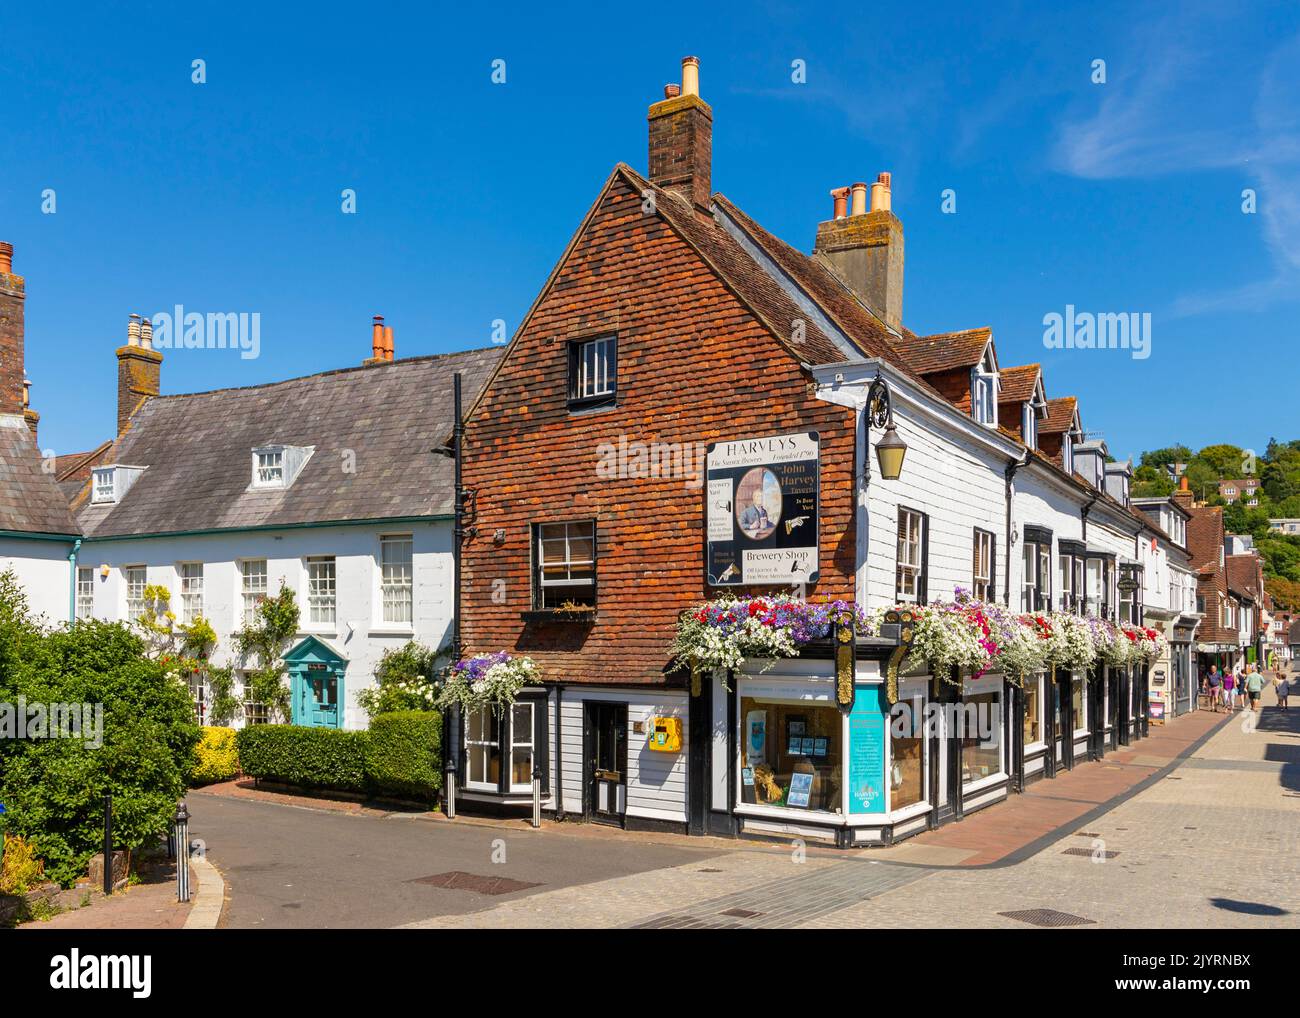 Lewes High Street, Lewes, East Sussex, UK Stock Photo